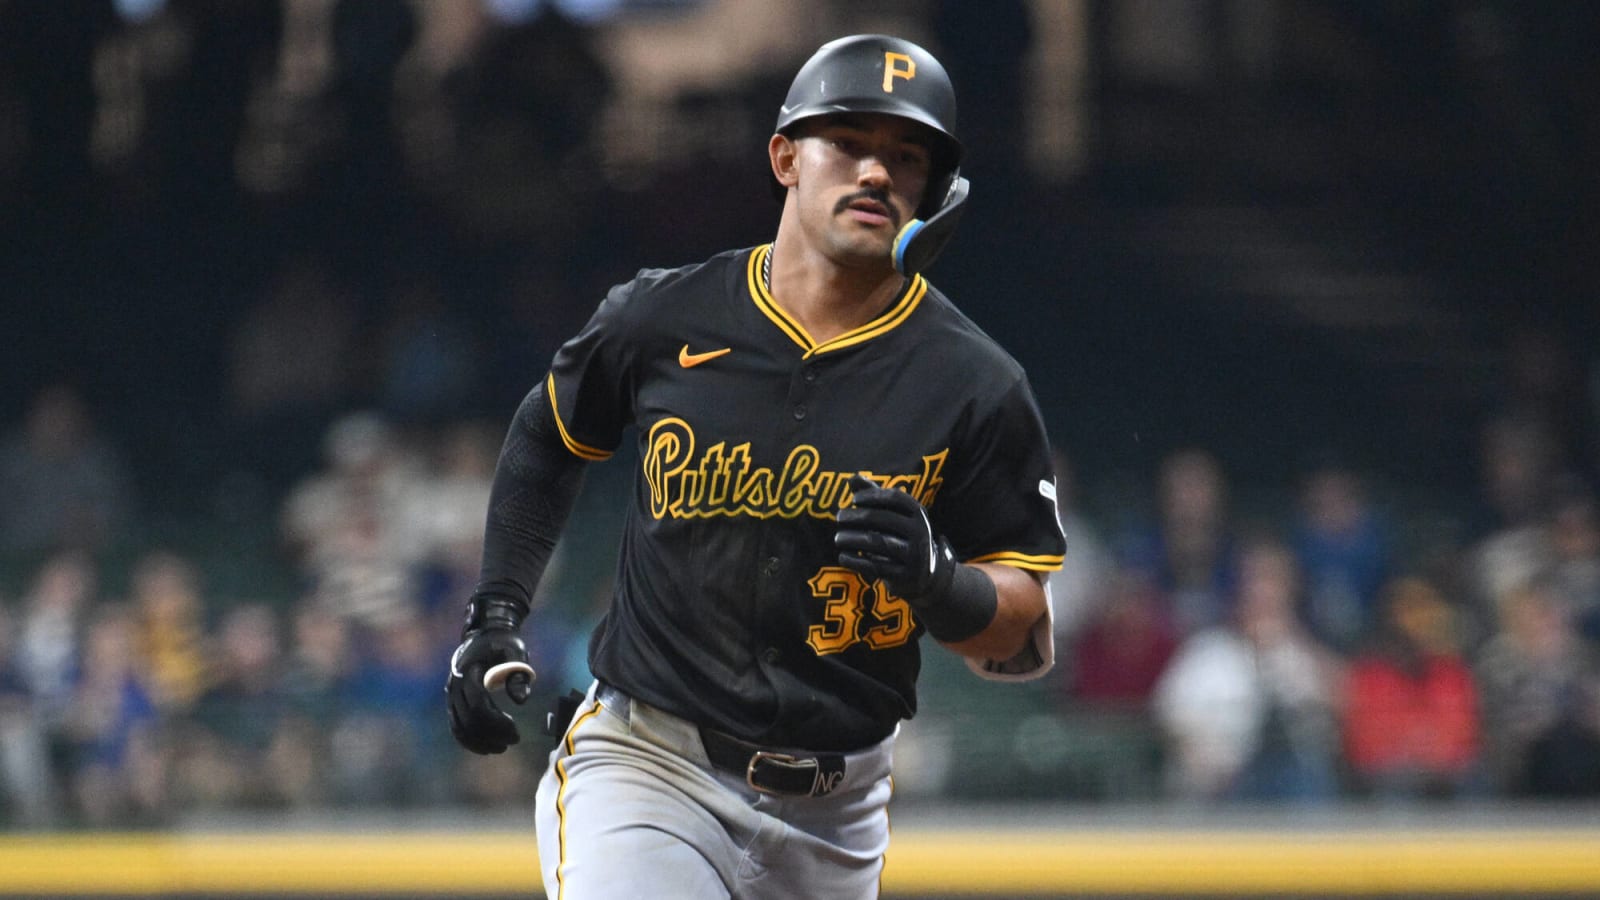 Gonzales making the most of his second chance with the Pirates